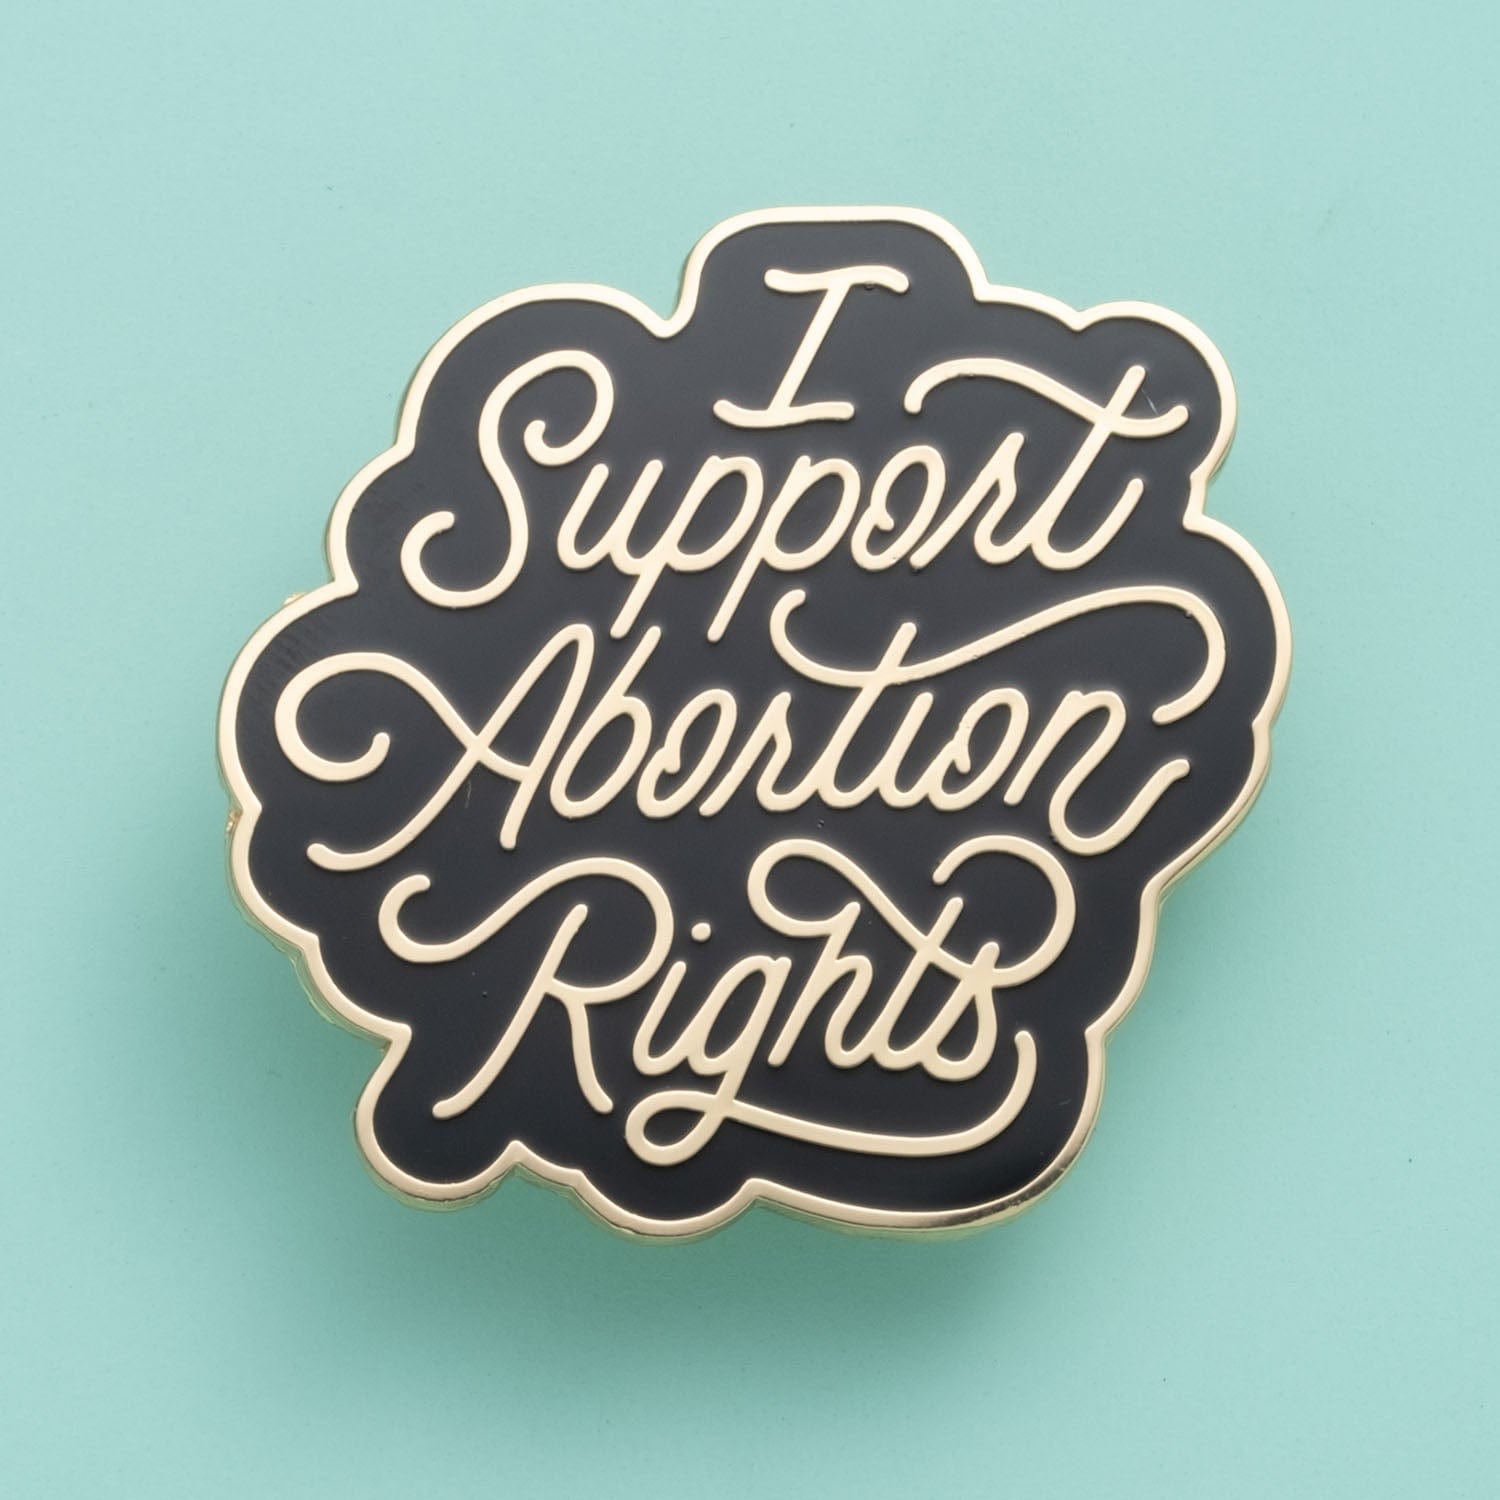 Abortion Rights Pin